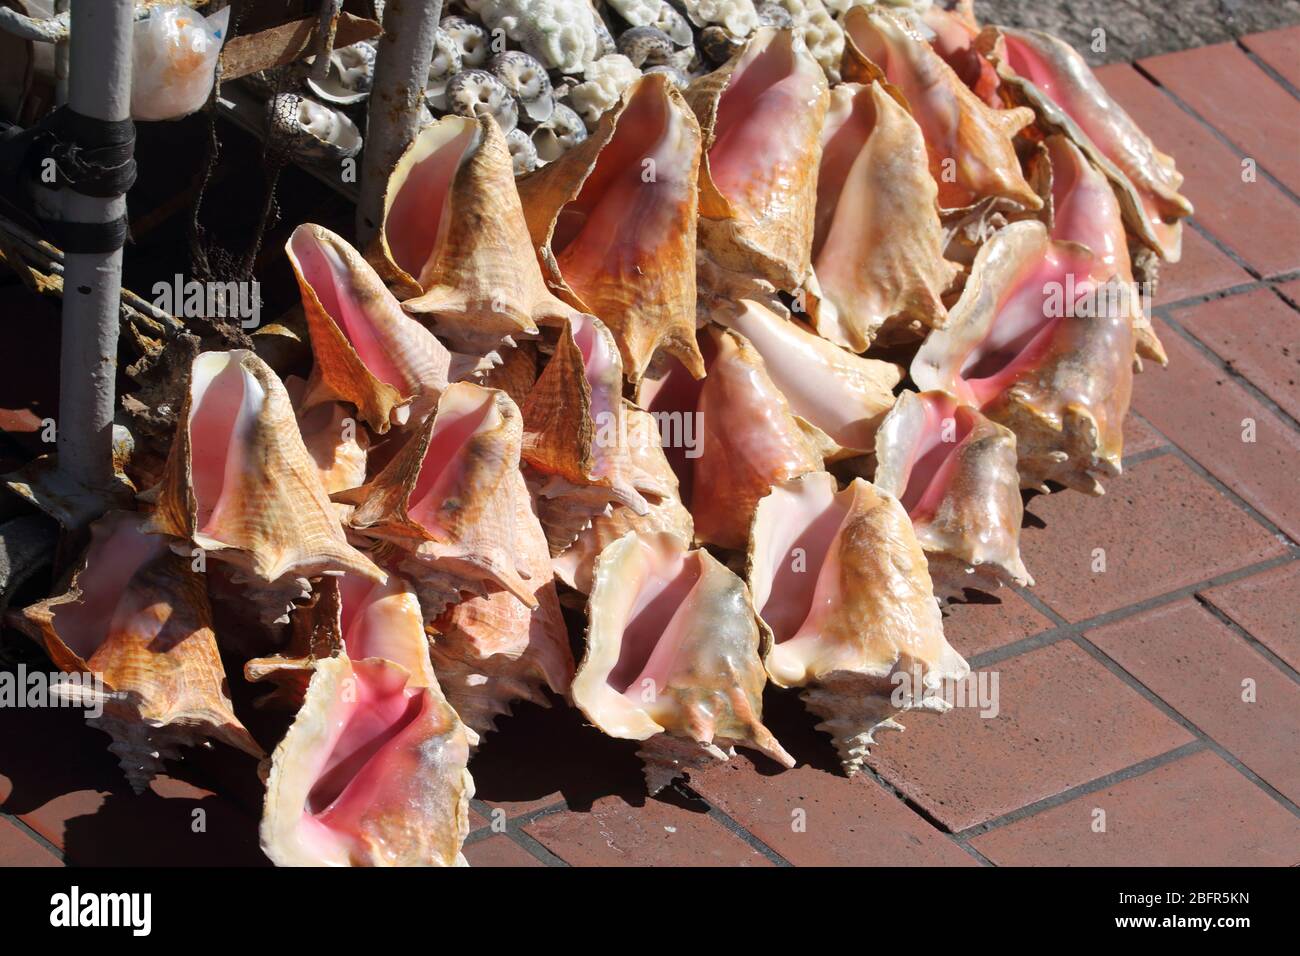 St George's Grenada Conch Shells on sale in Market Stock Photo